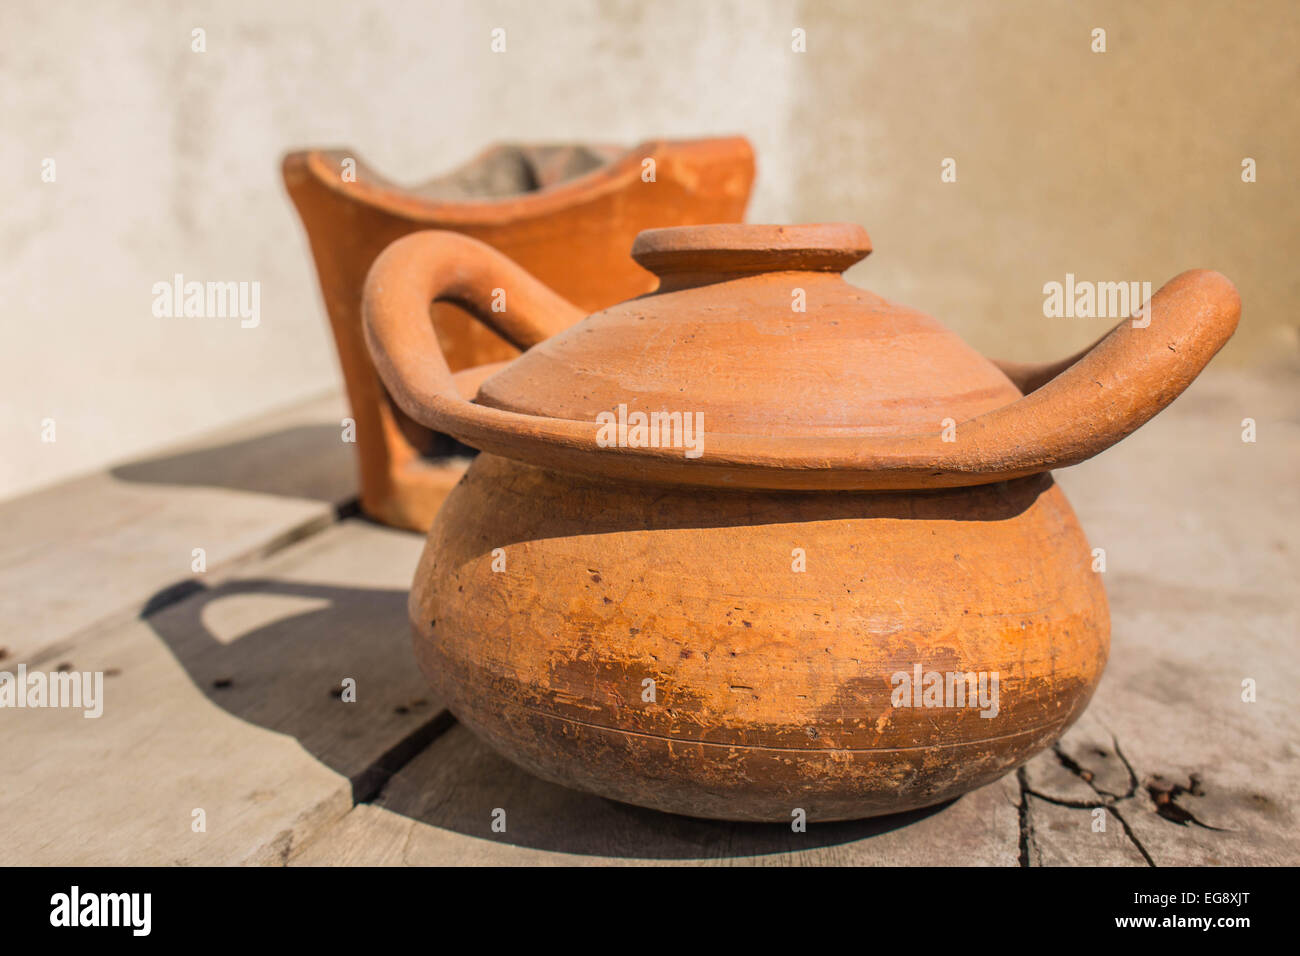 Clay pot on a wooden floor Stock Photo